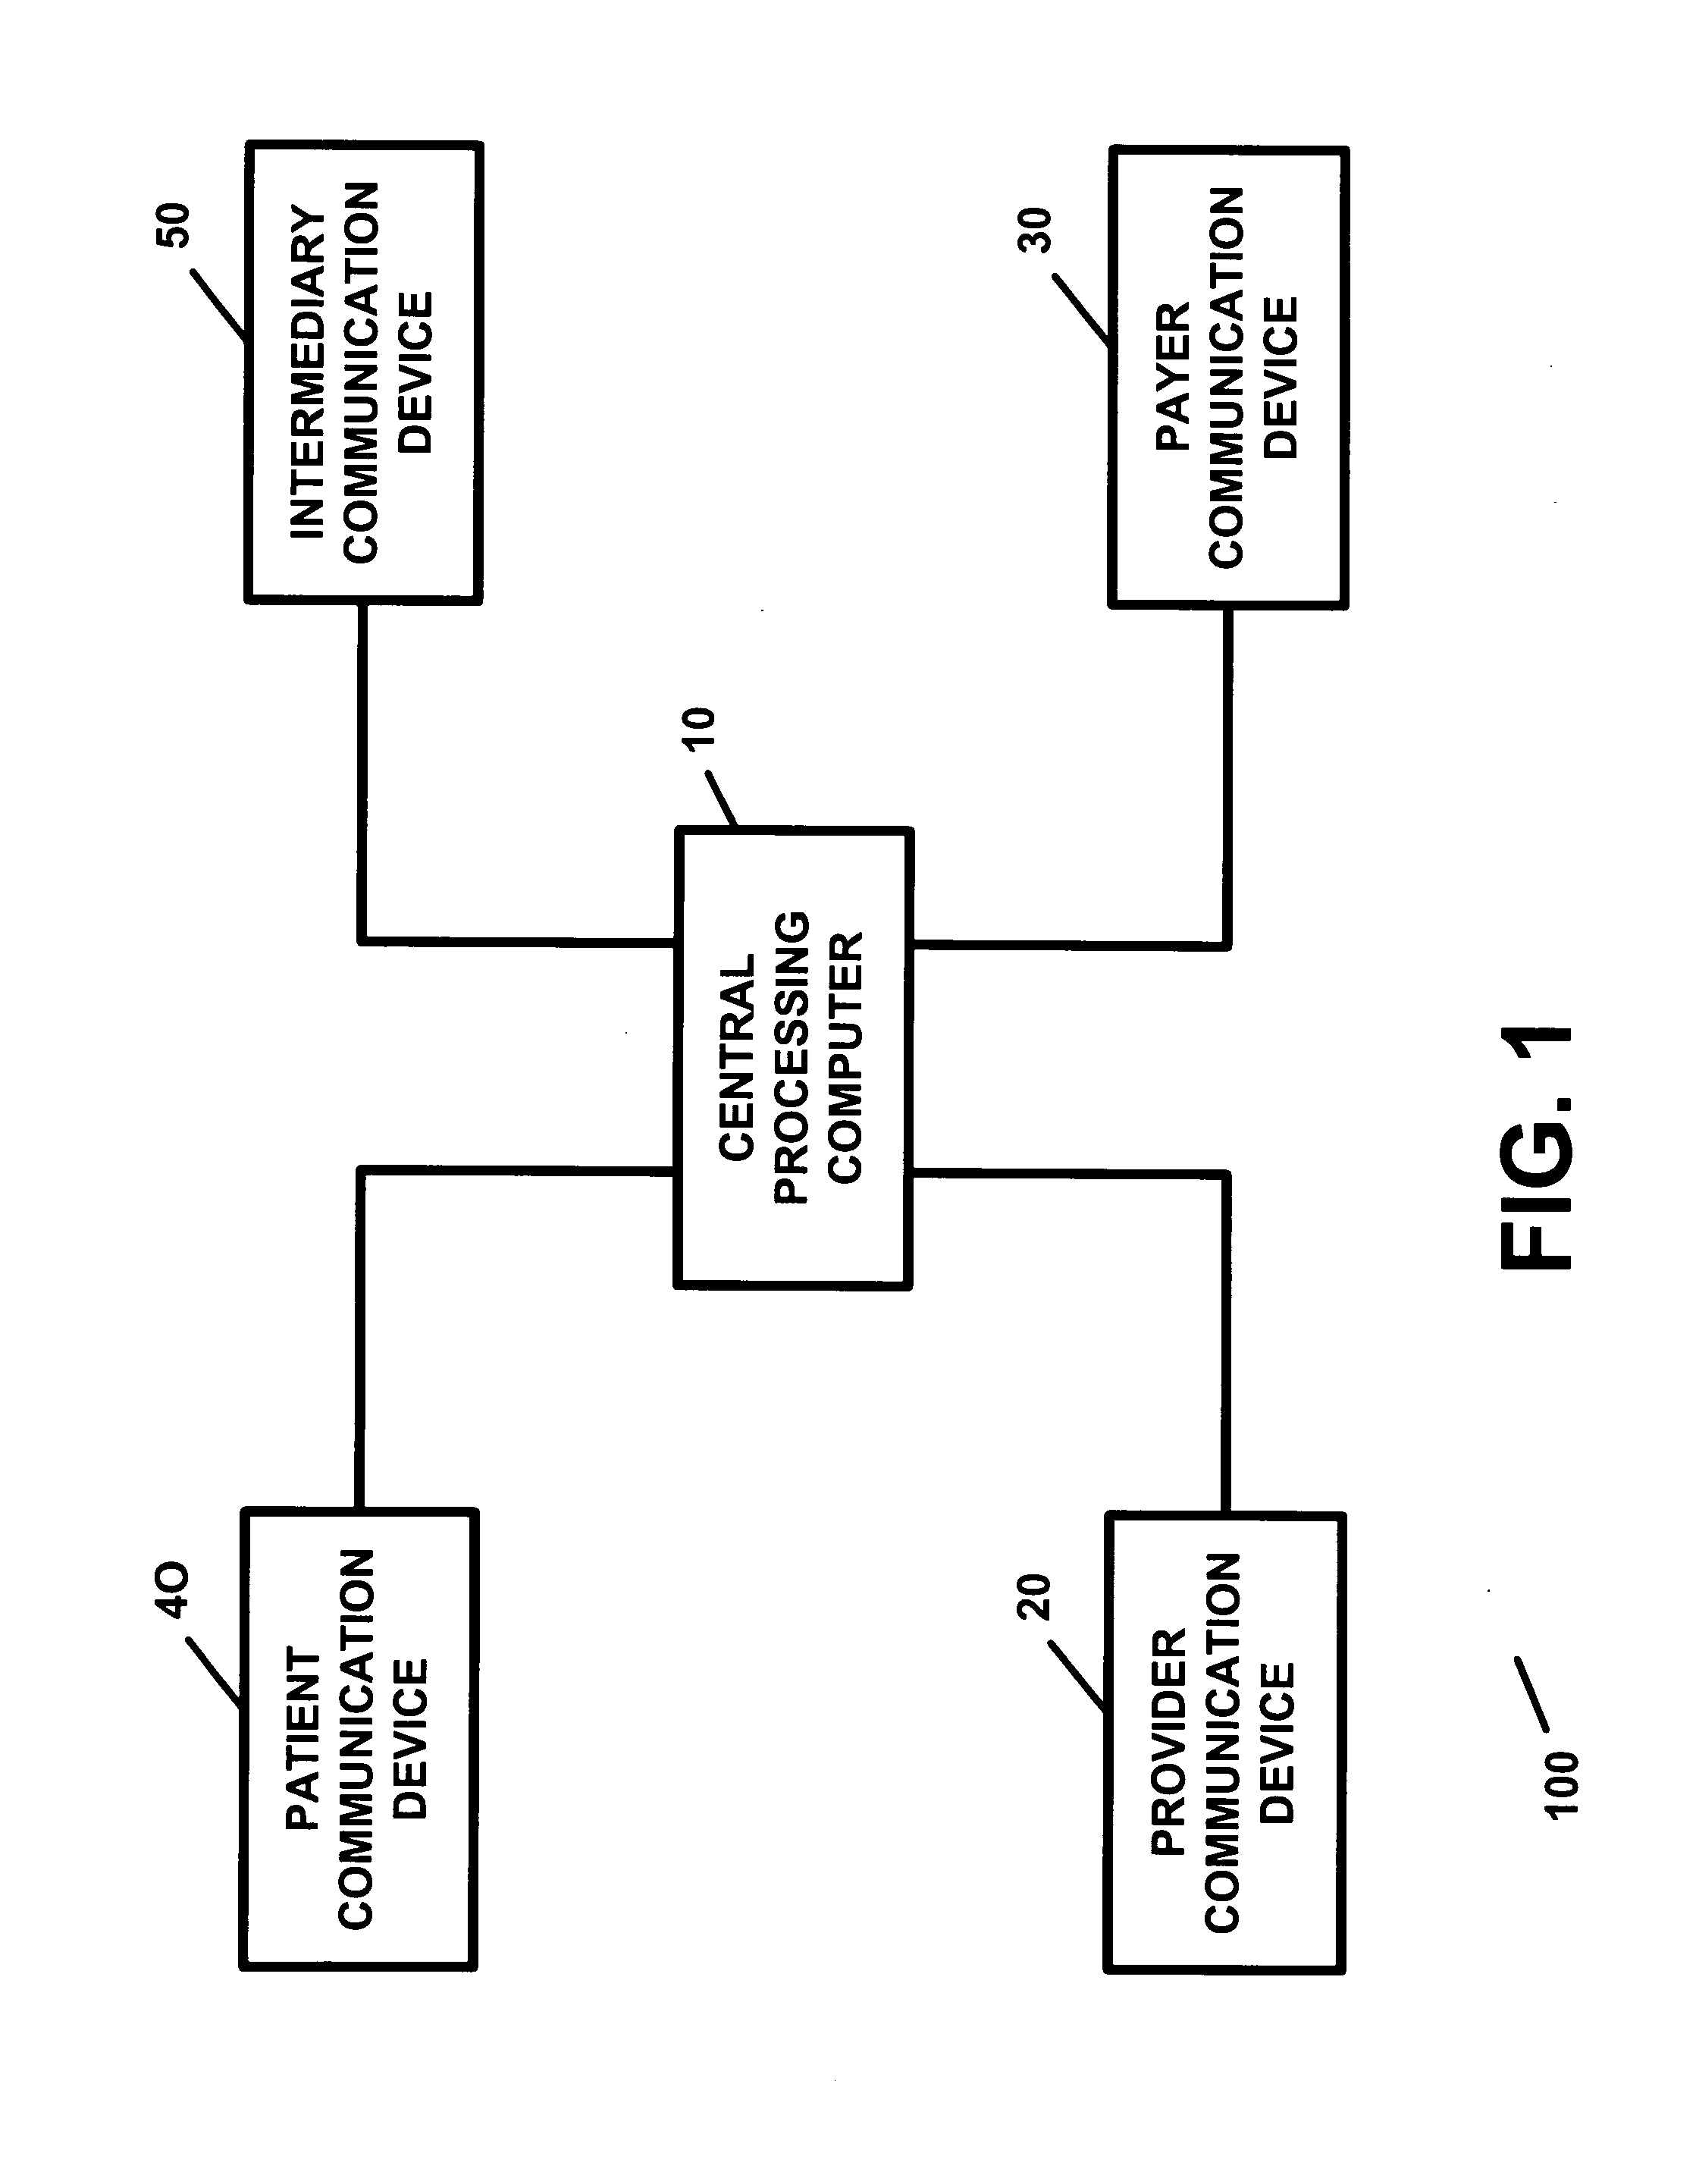 Apparatus and method for processing and/or for providing healthcare information and/or healthcare-related information